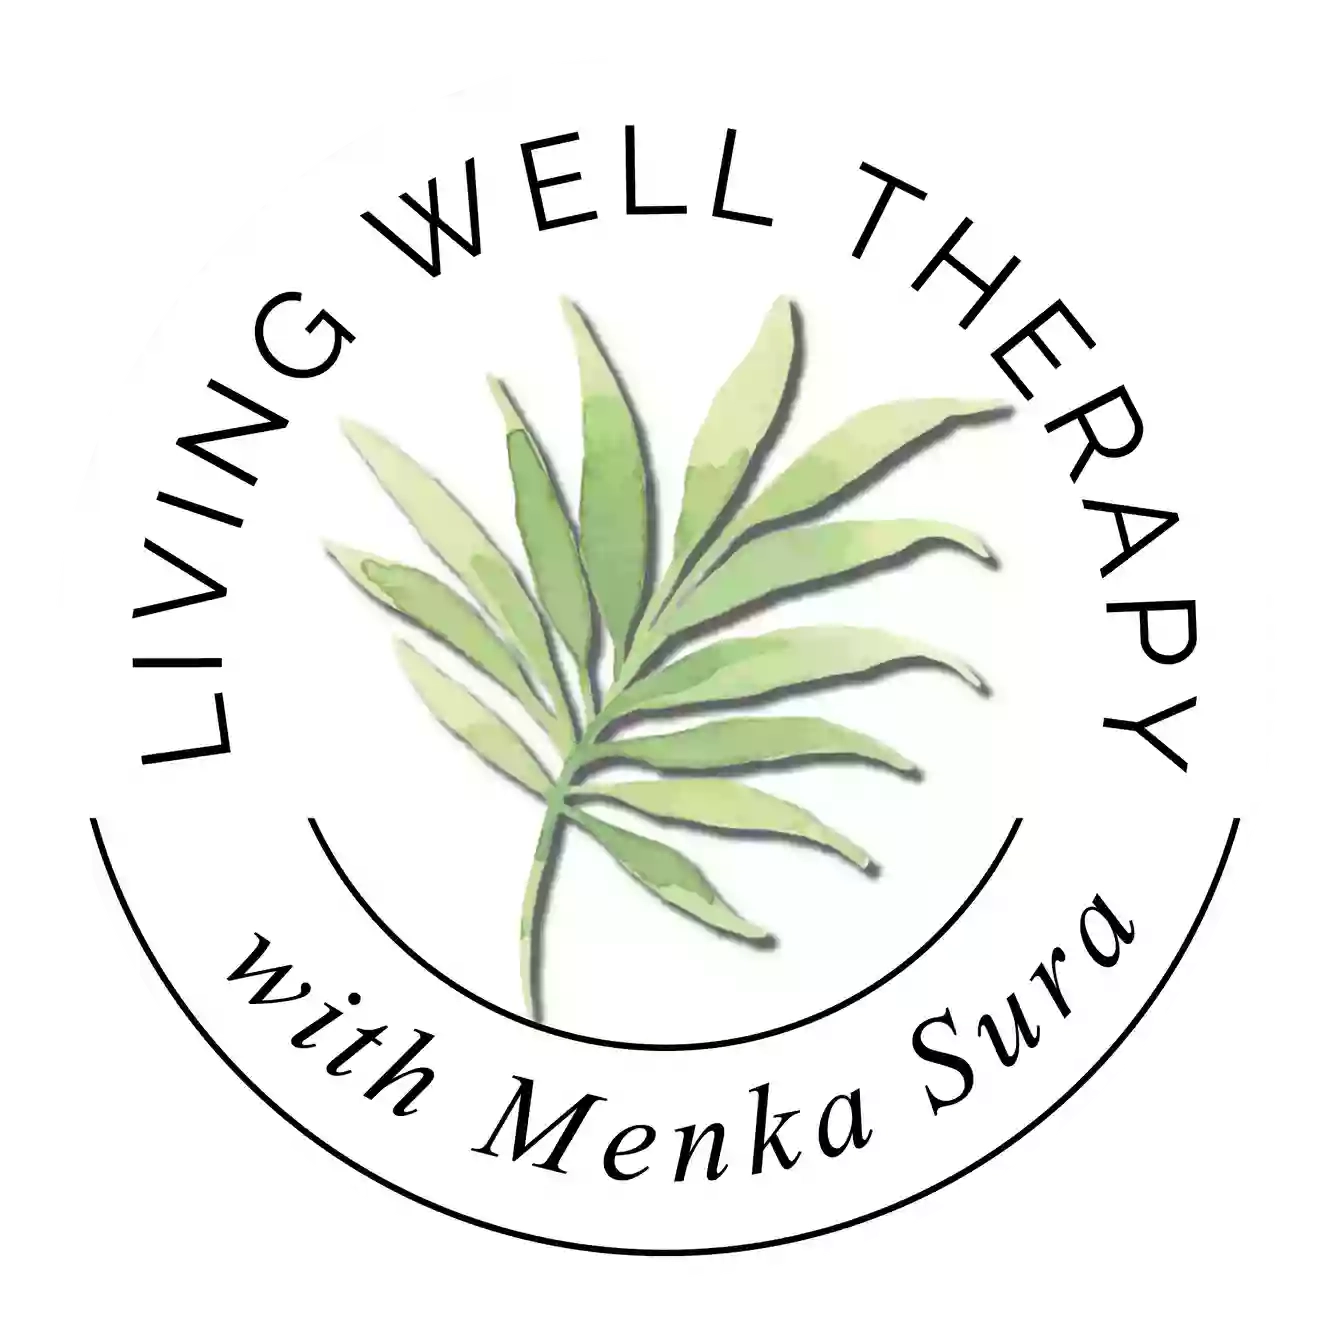 Living Well Therapy